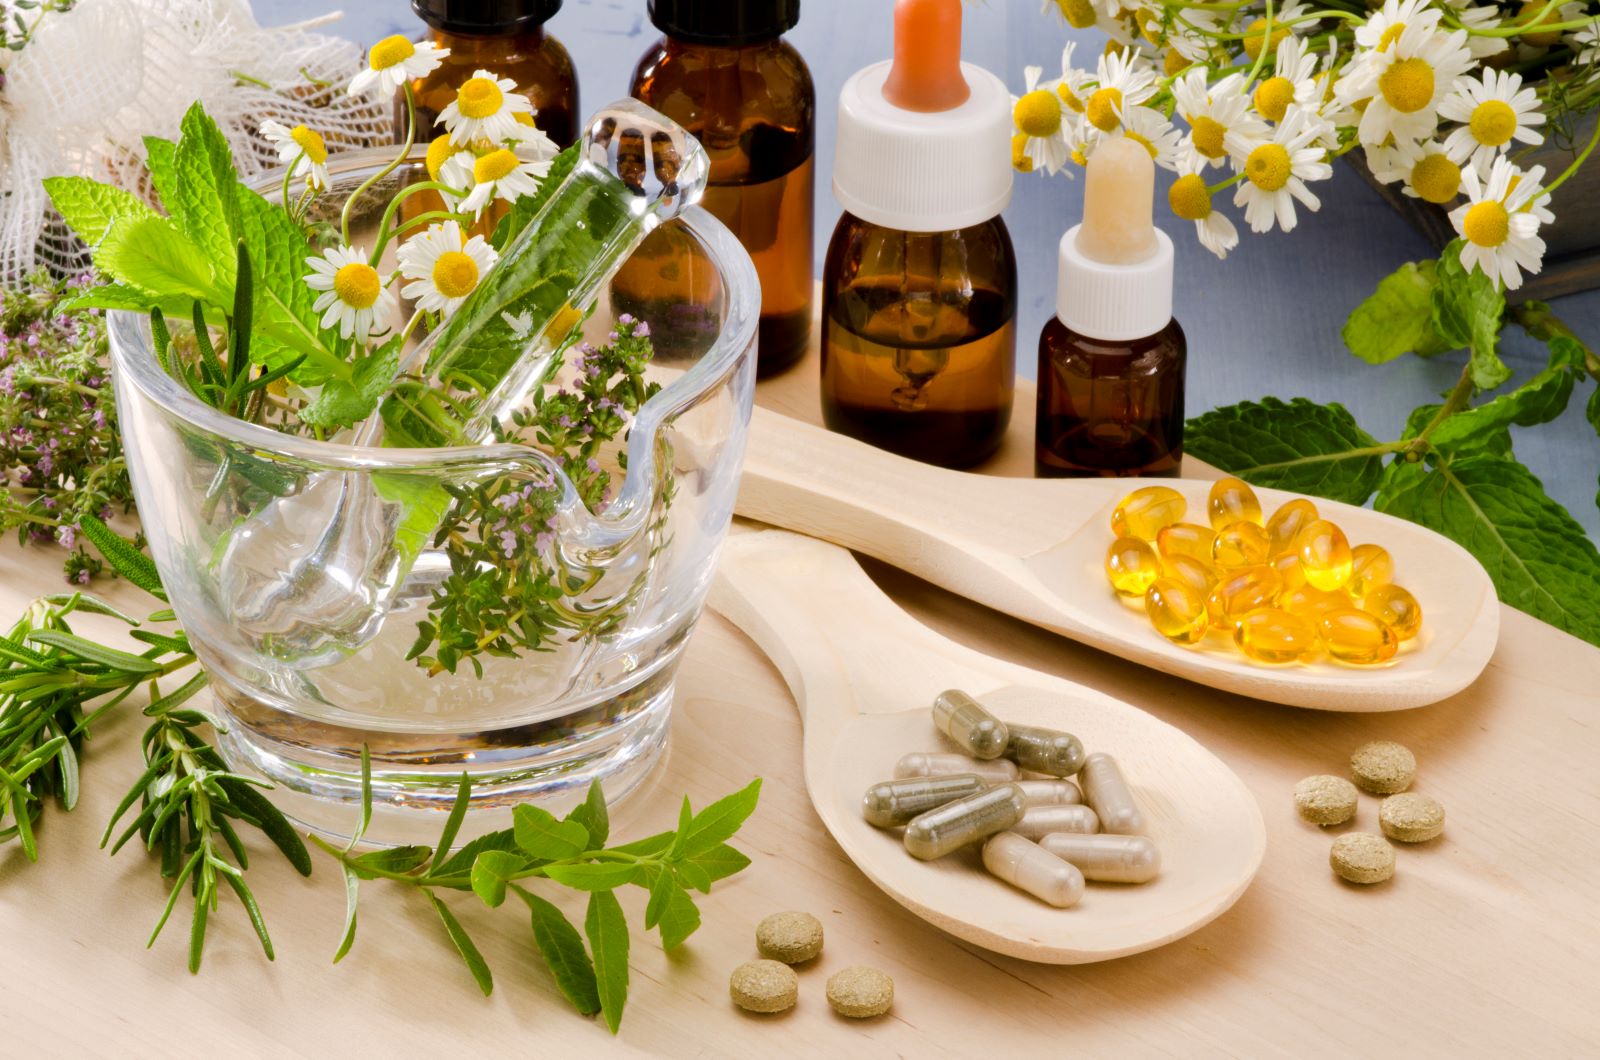 Can Herbal Supplements Cause Heart Arrhythmias?